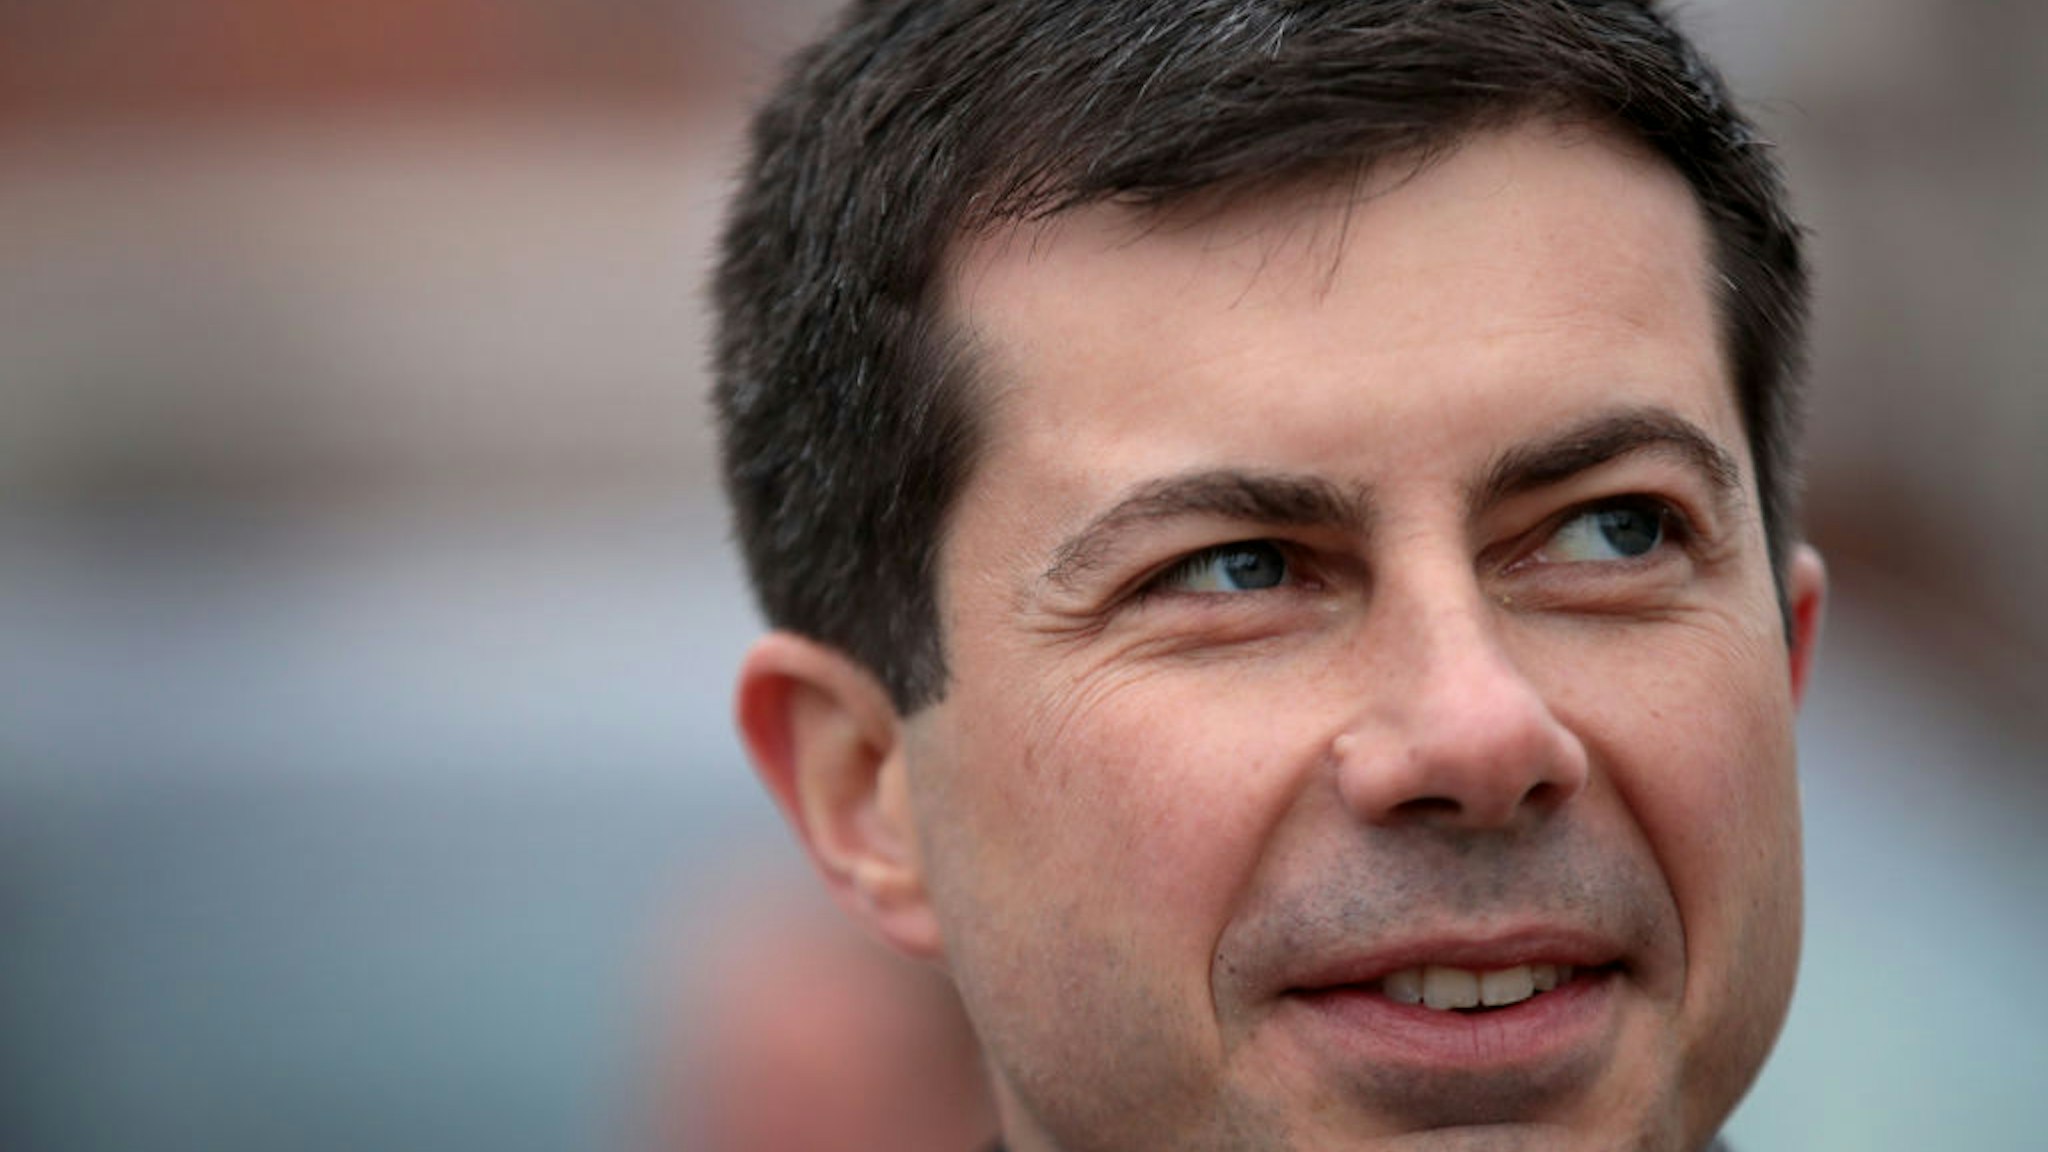 Democratic presidential candidate South Bend, Indiana Mayor Pete Buttigieg takes a brief tour of town during a campaign stop on November 04, 2019 in Britt, Iowa.